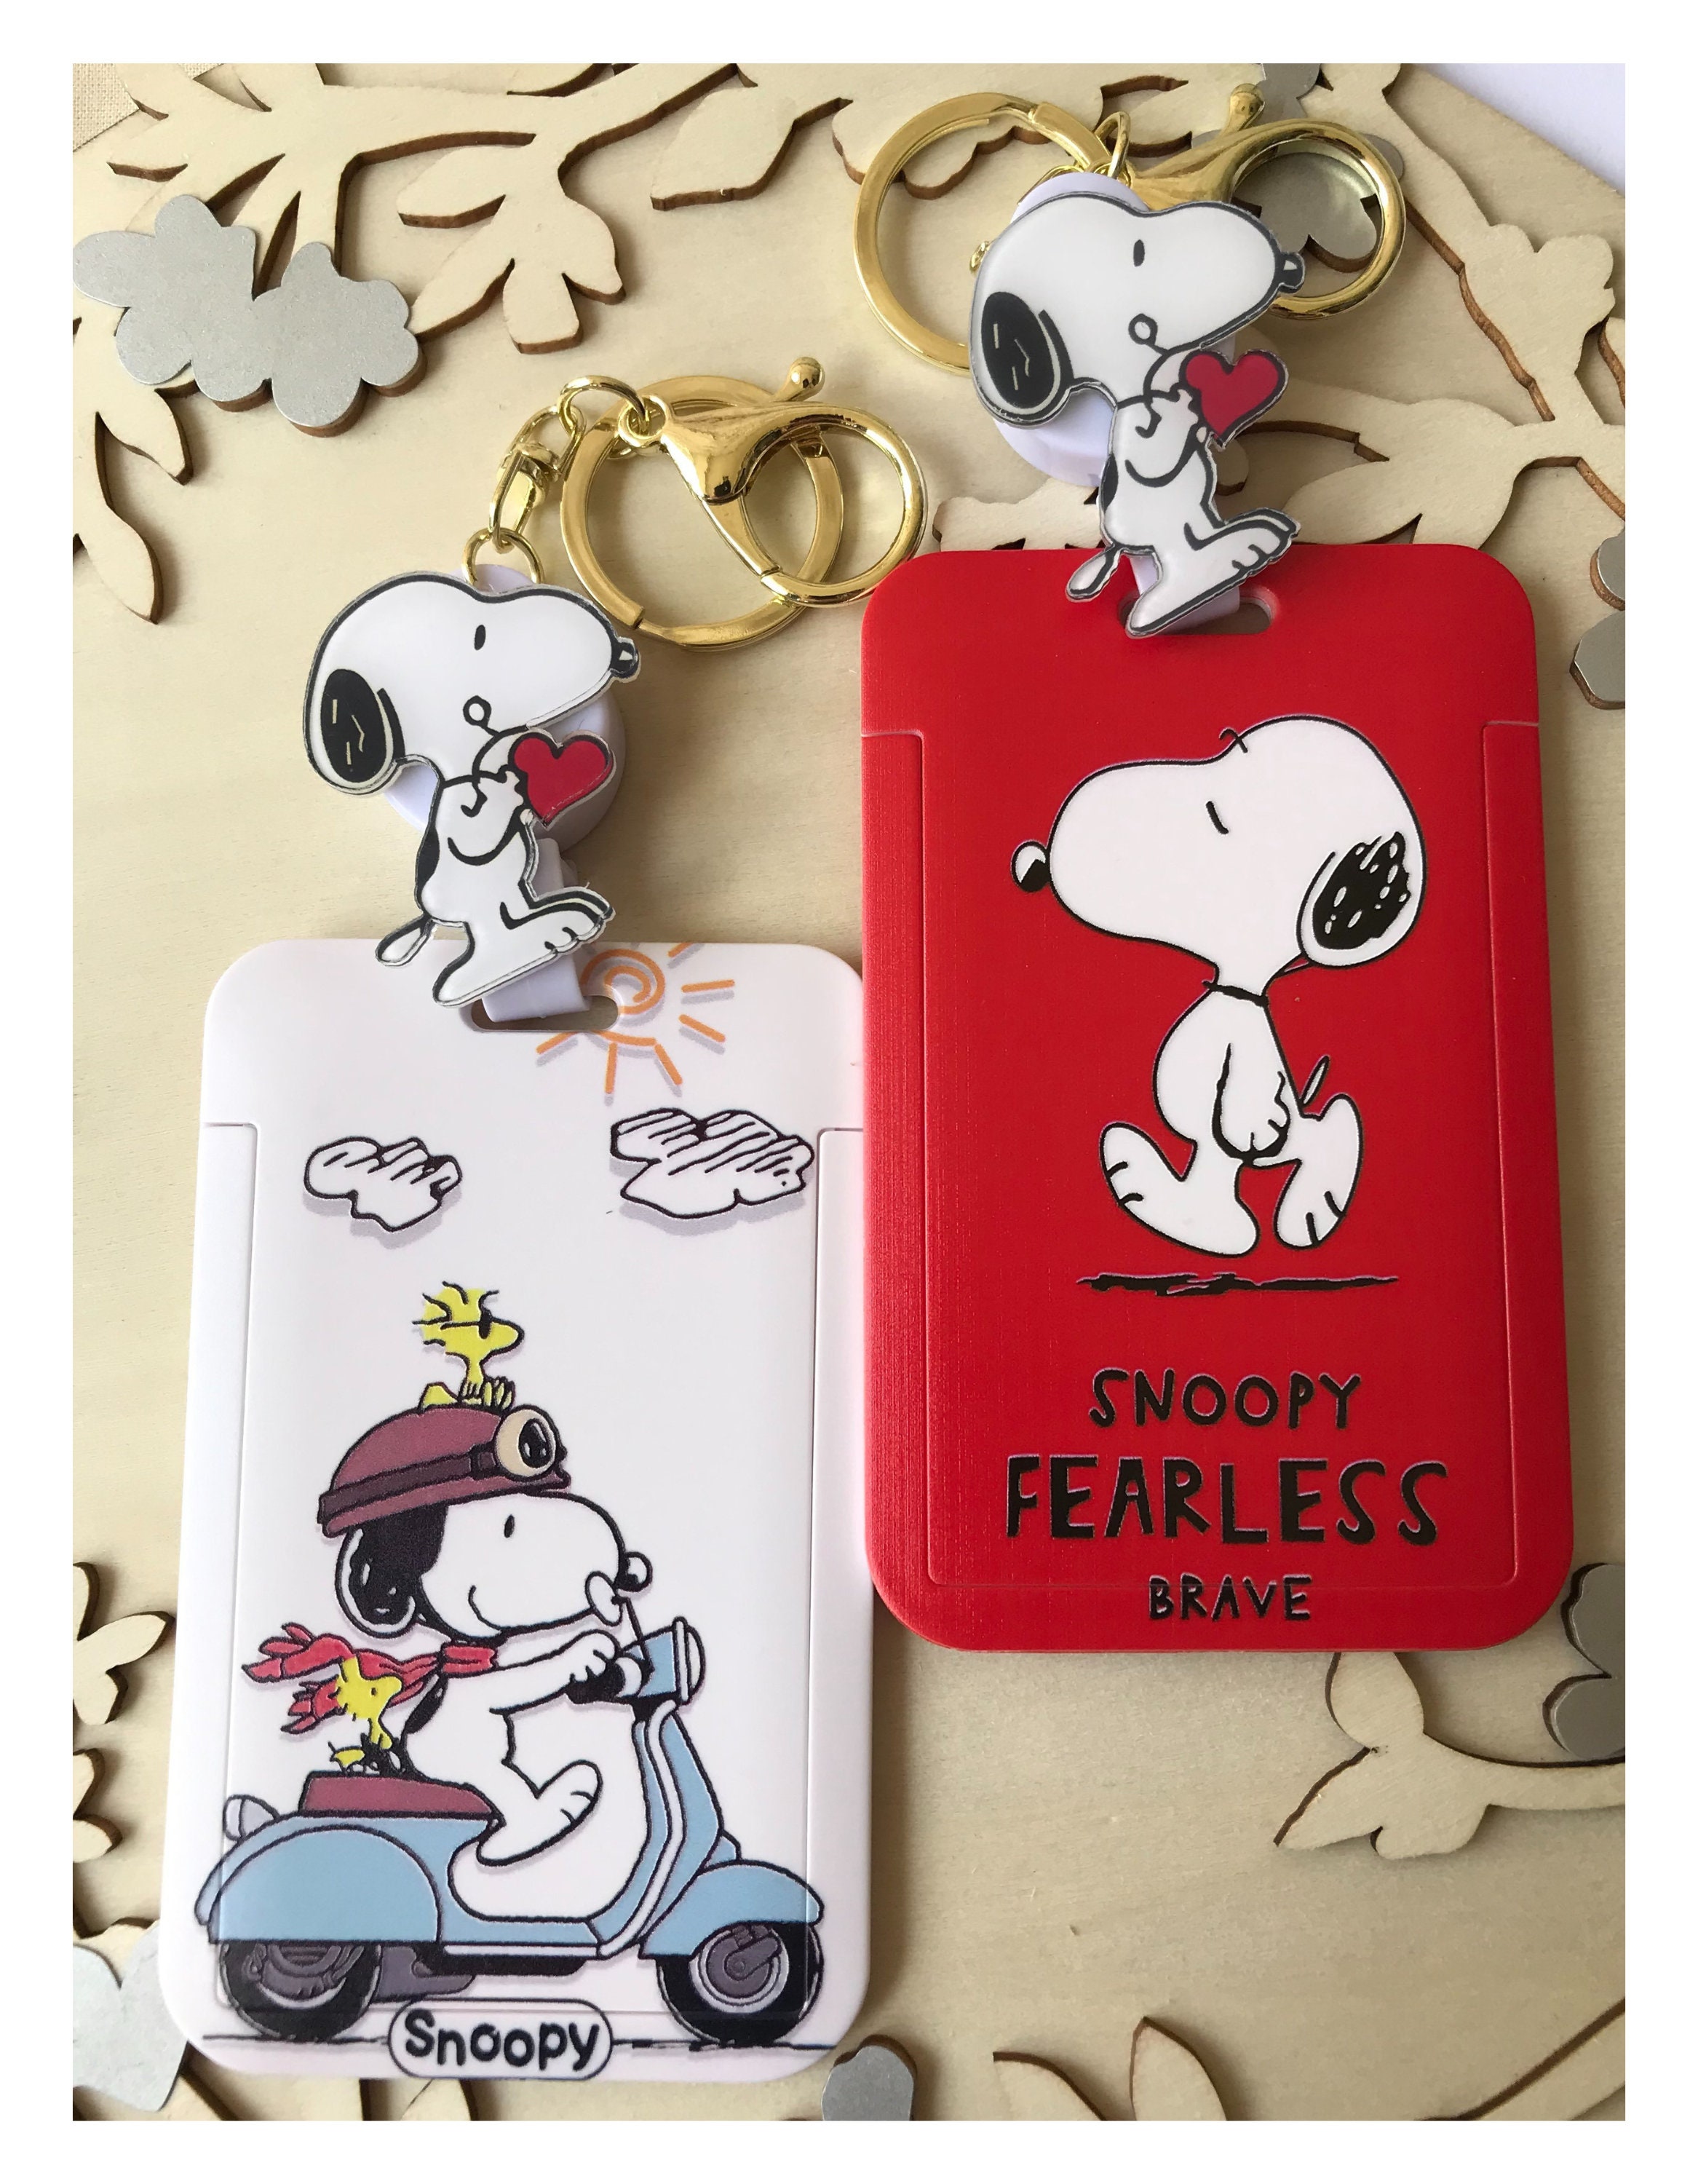 Snoopy and His Friends Keychain With Charms Woodstock Key Ring